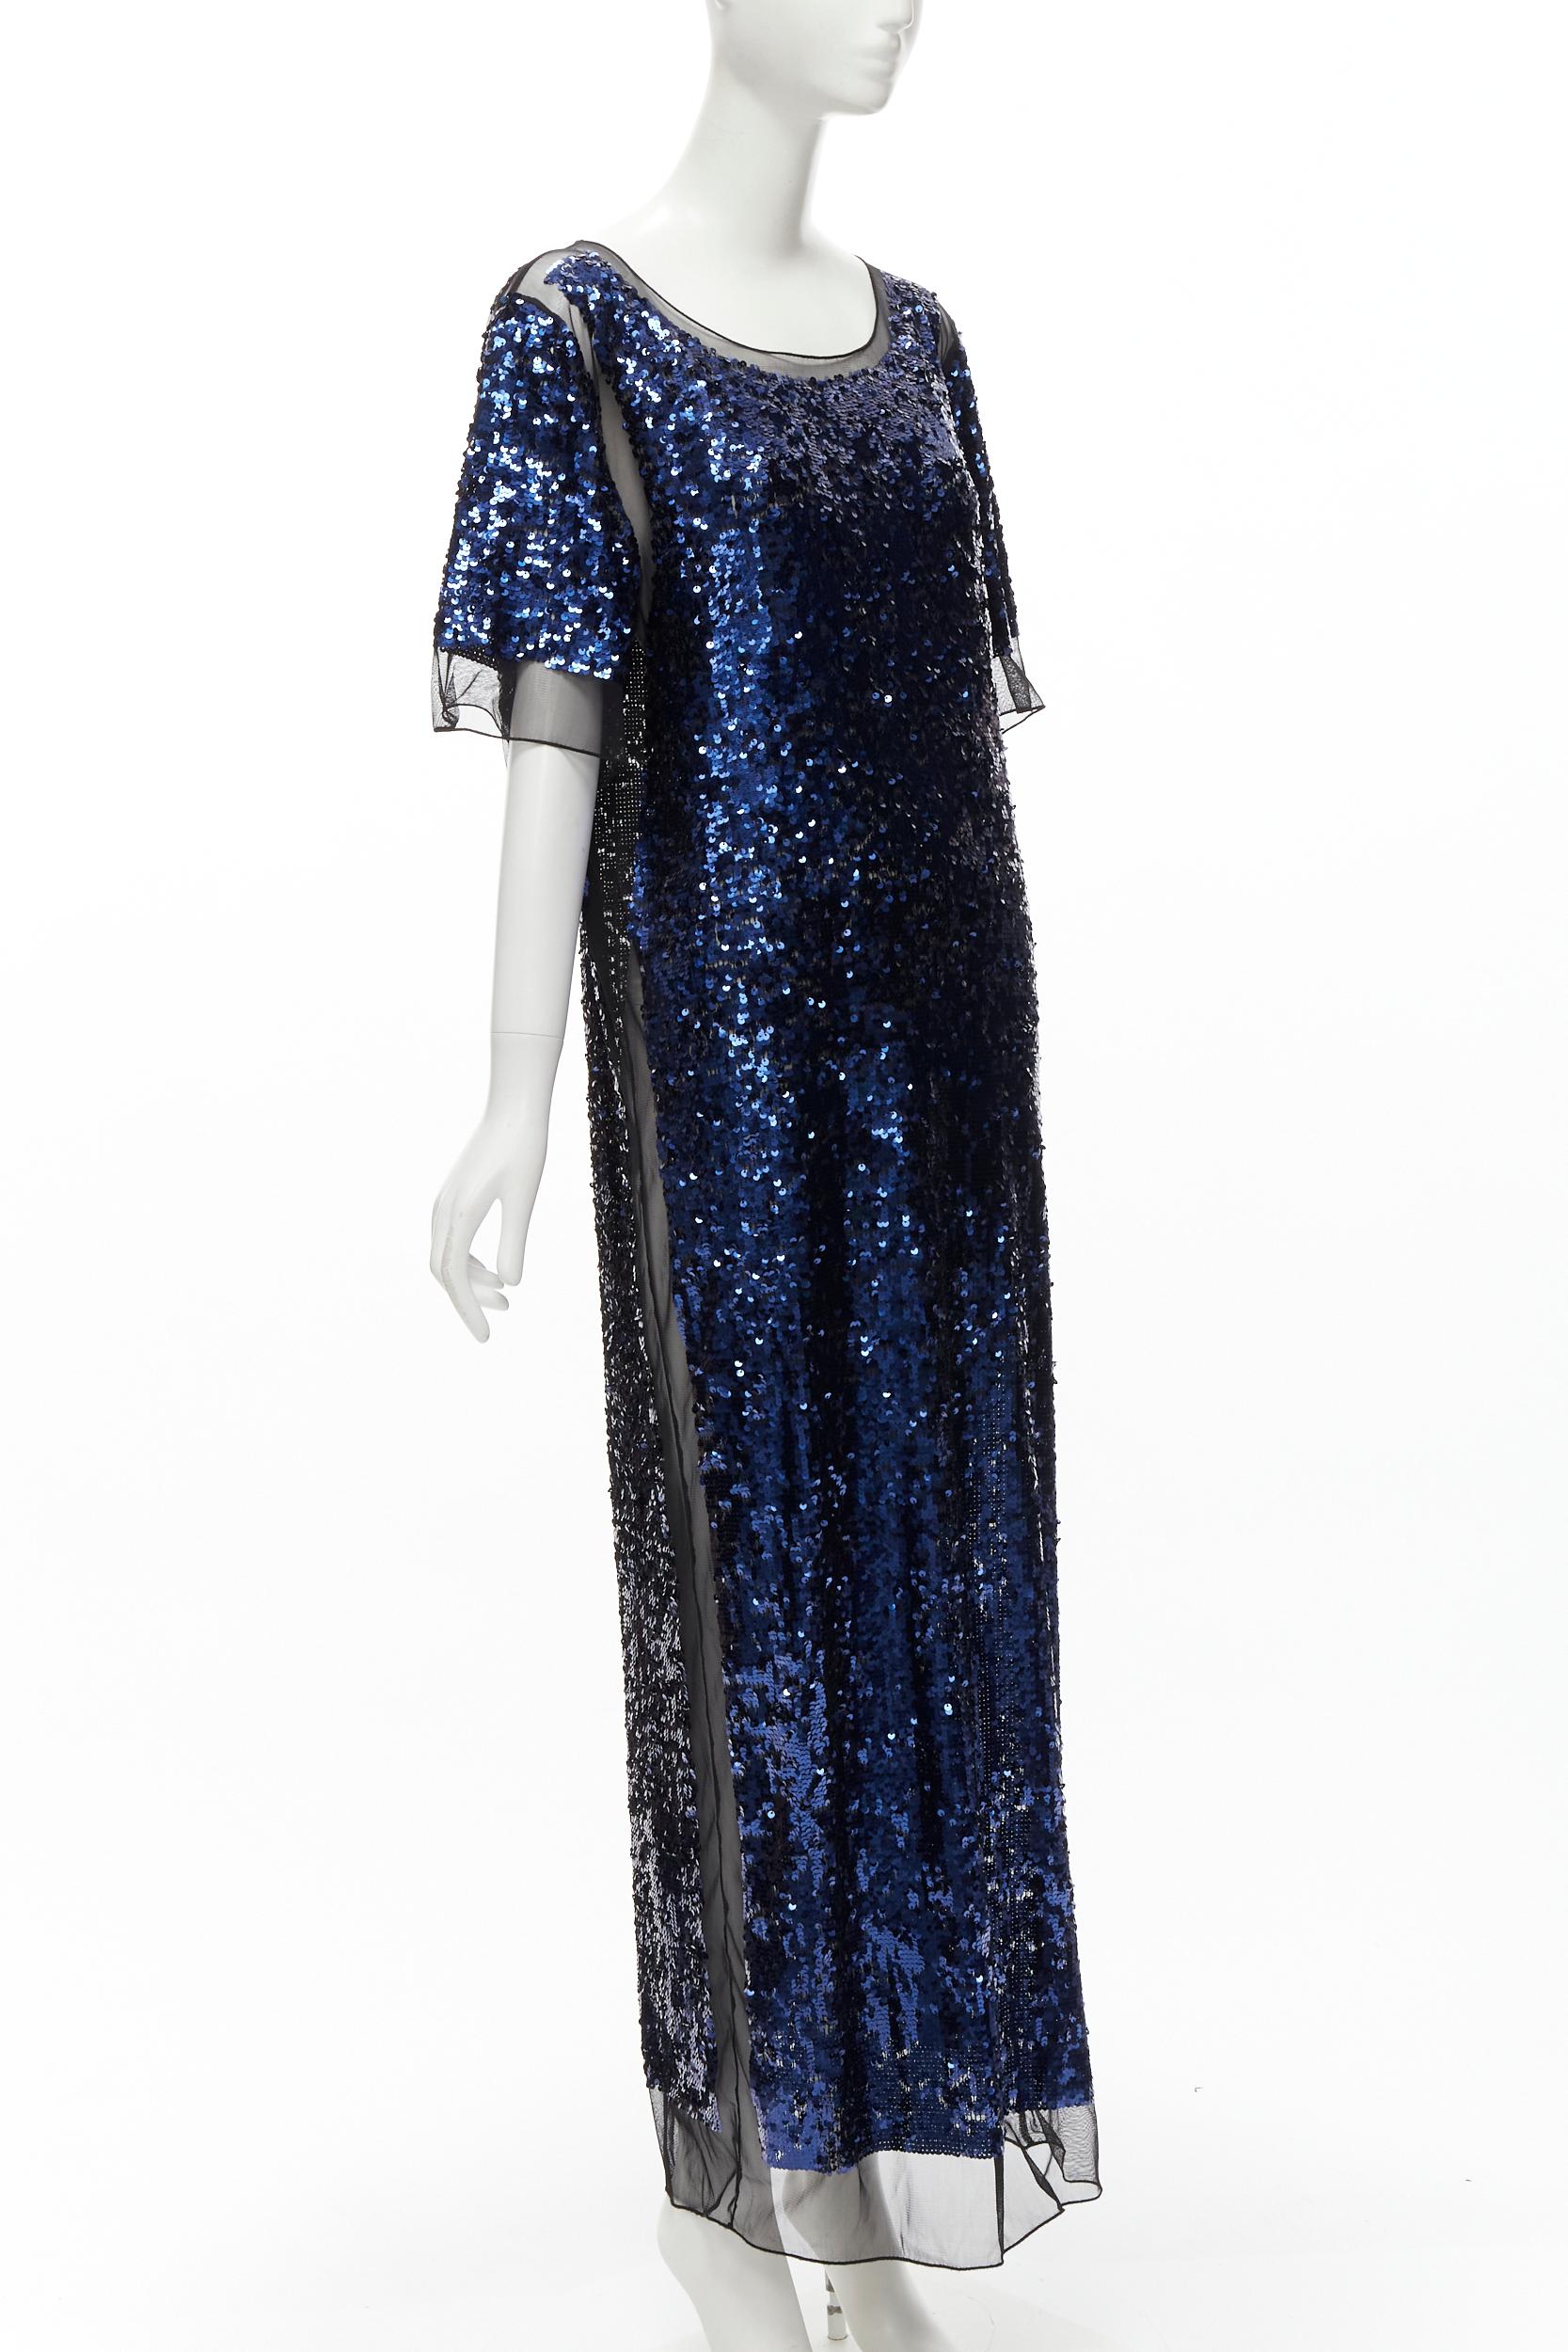 BY MALENE BIRGER blue sequins overlay black sheer evening gown dress M In Good Condition For Sale In Hong Kong, NT